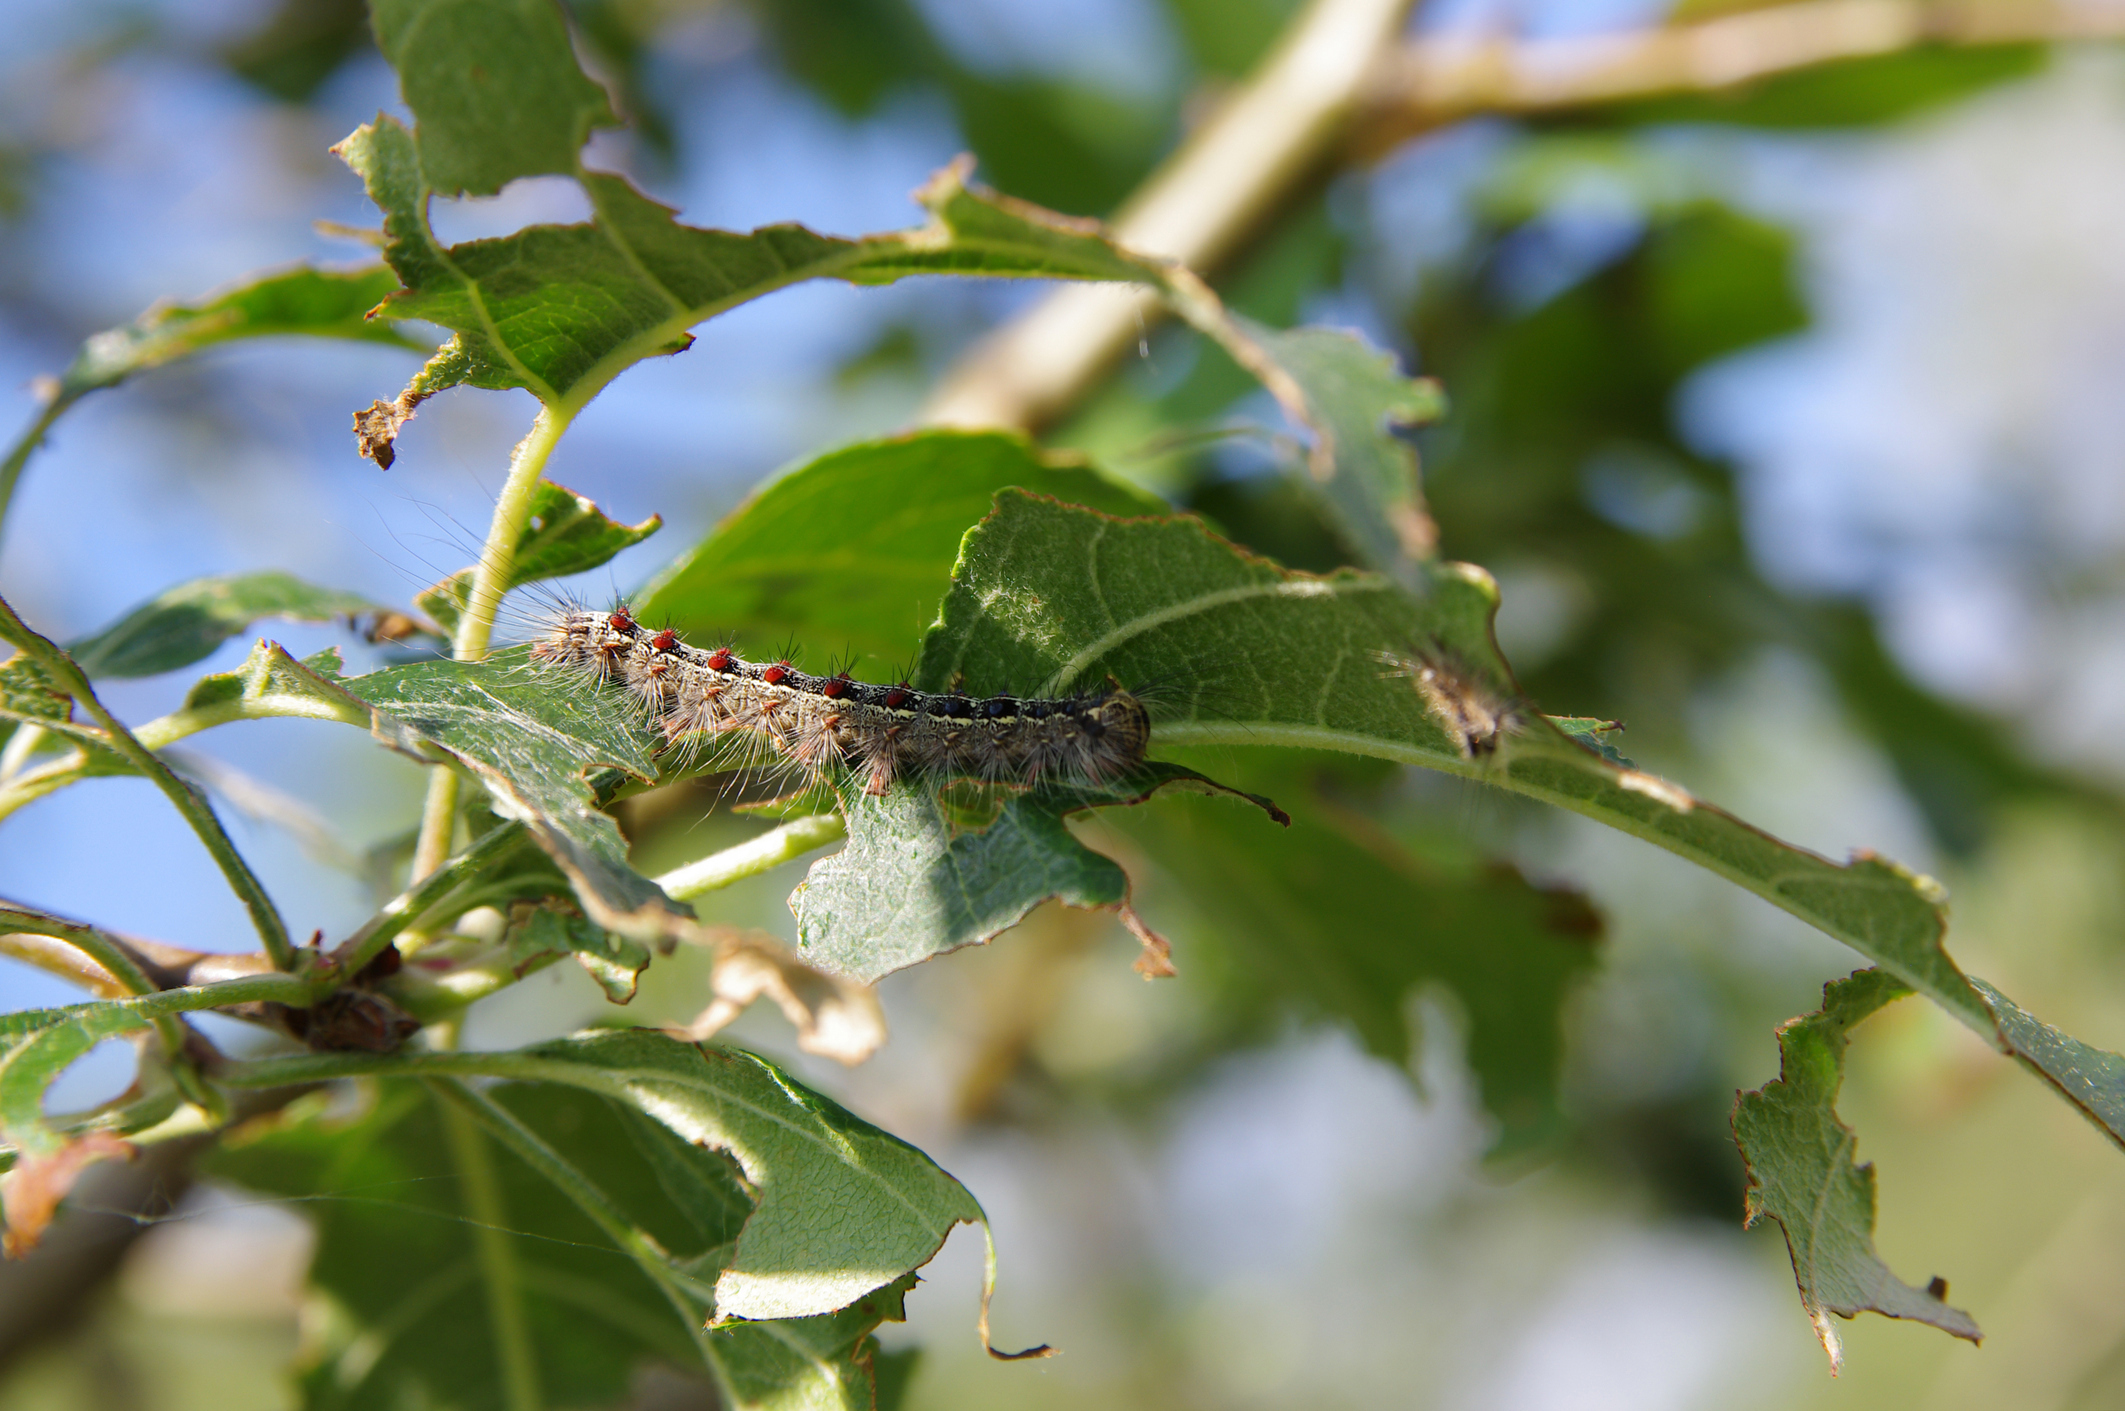 Close-up of a gypsy moth on an apple tree. (Getty Images)